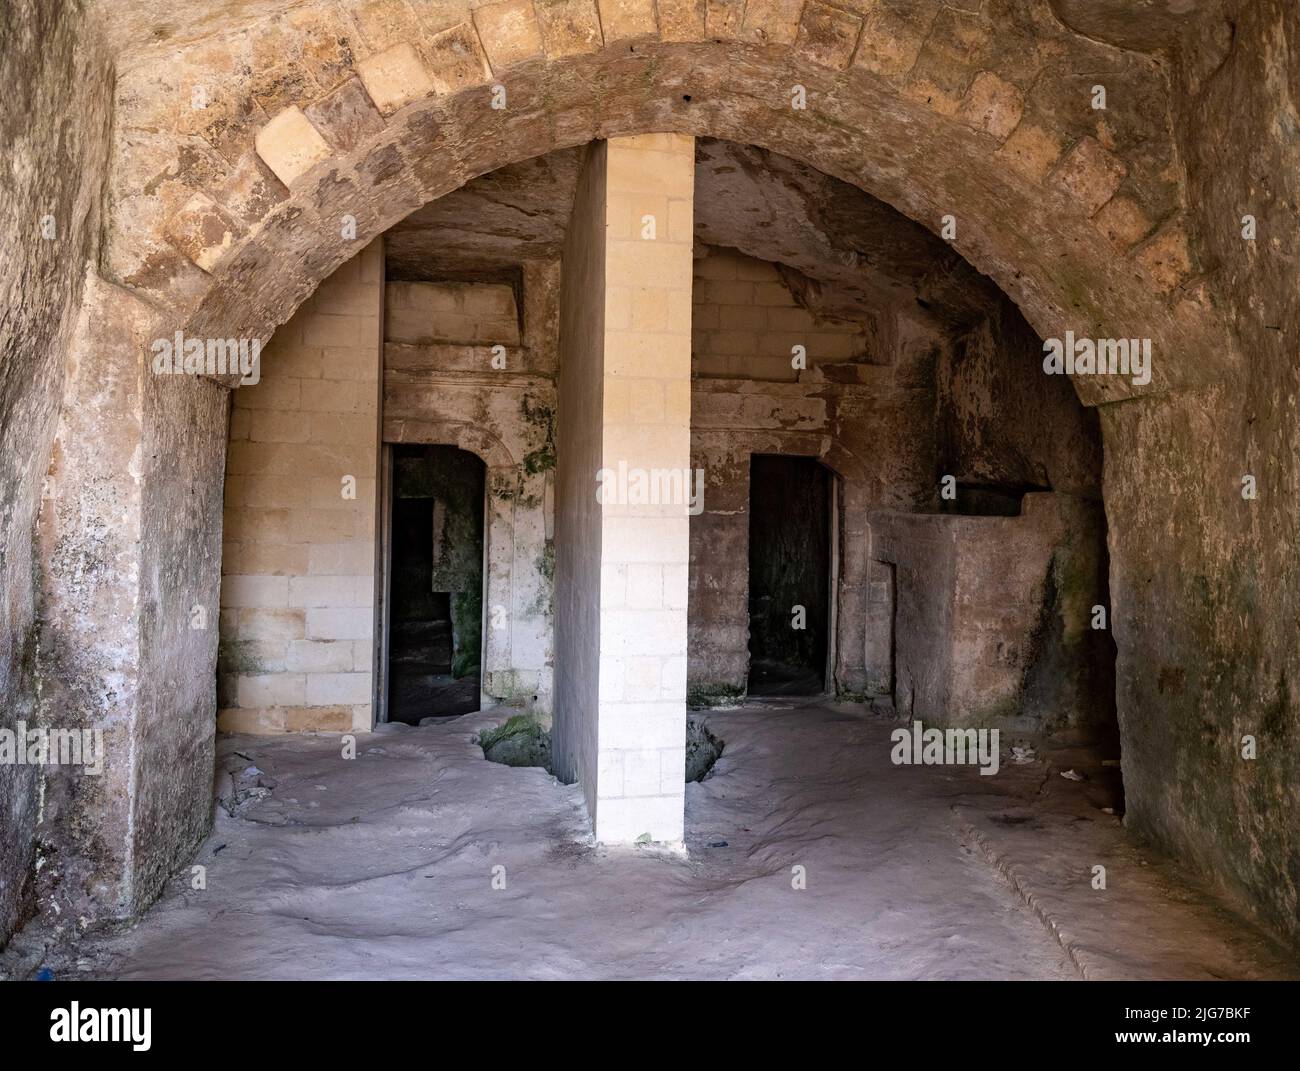 Unrestored cave dwelling of the Sassi in the ancient Italian town of Matera, Basilicata with various rooms, arches, and cisterns Stock Photo